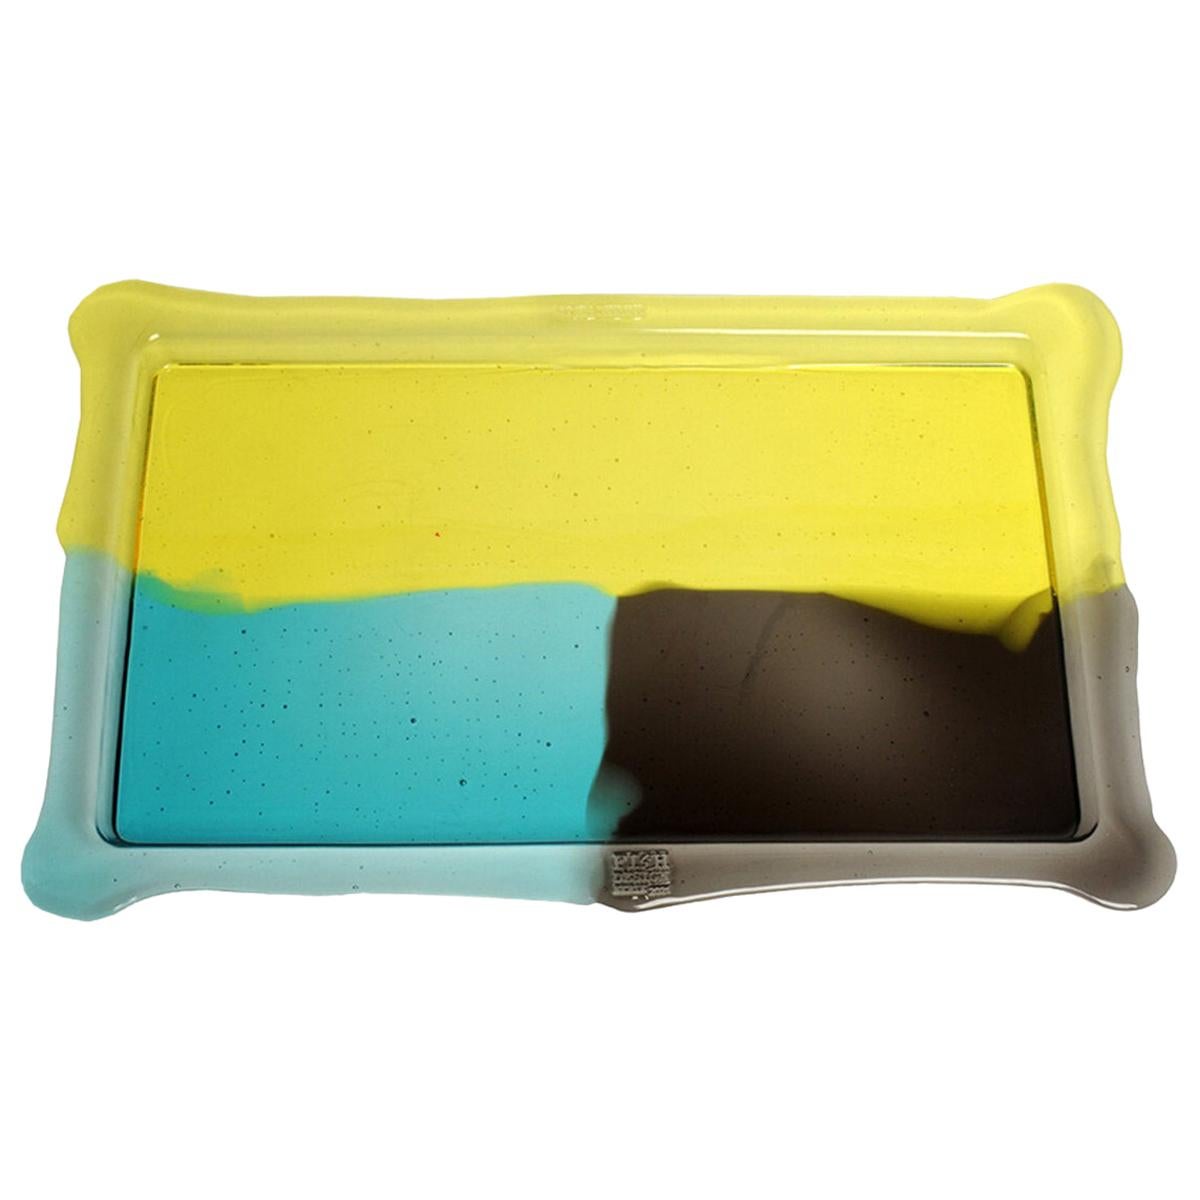 Try-Tray Large Rectangular Tray in Clear Yellow, Aqua, Grey by Gaetano Pesce For Sale